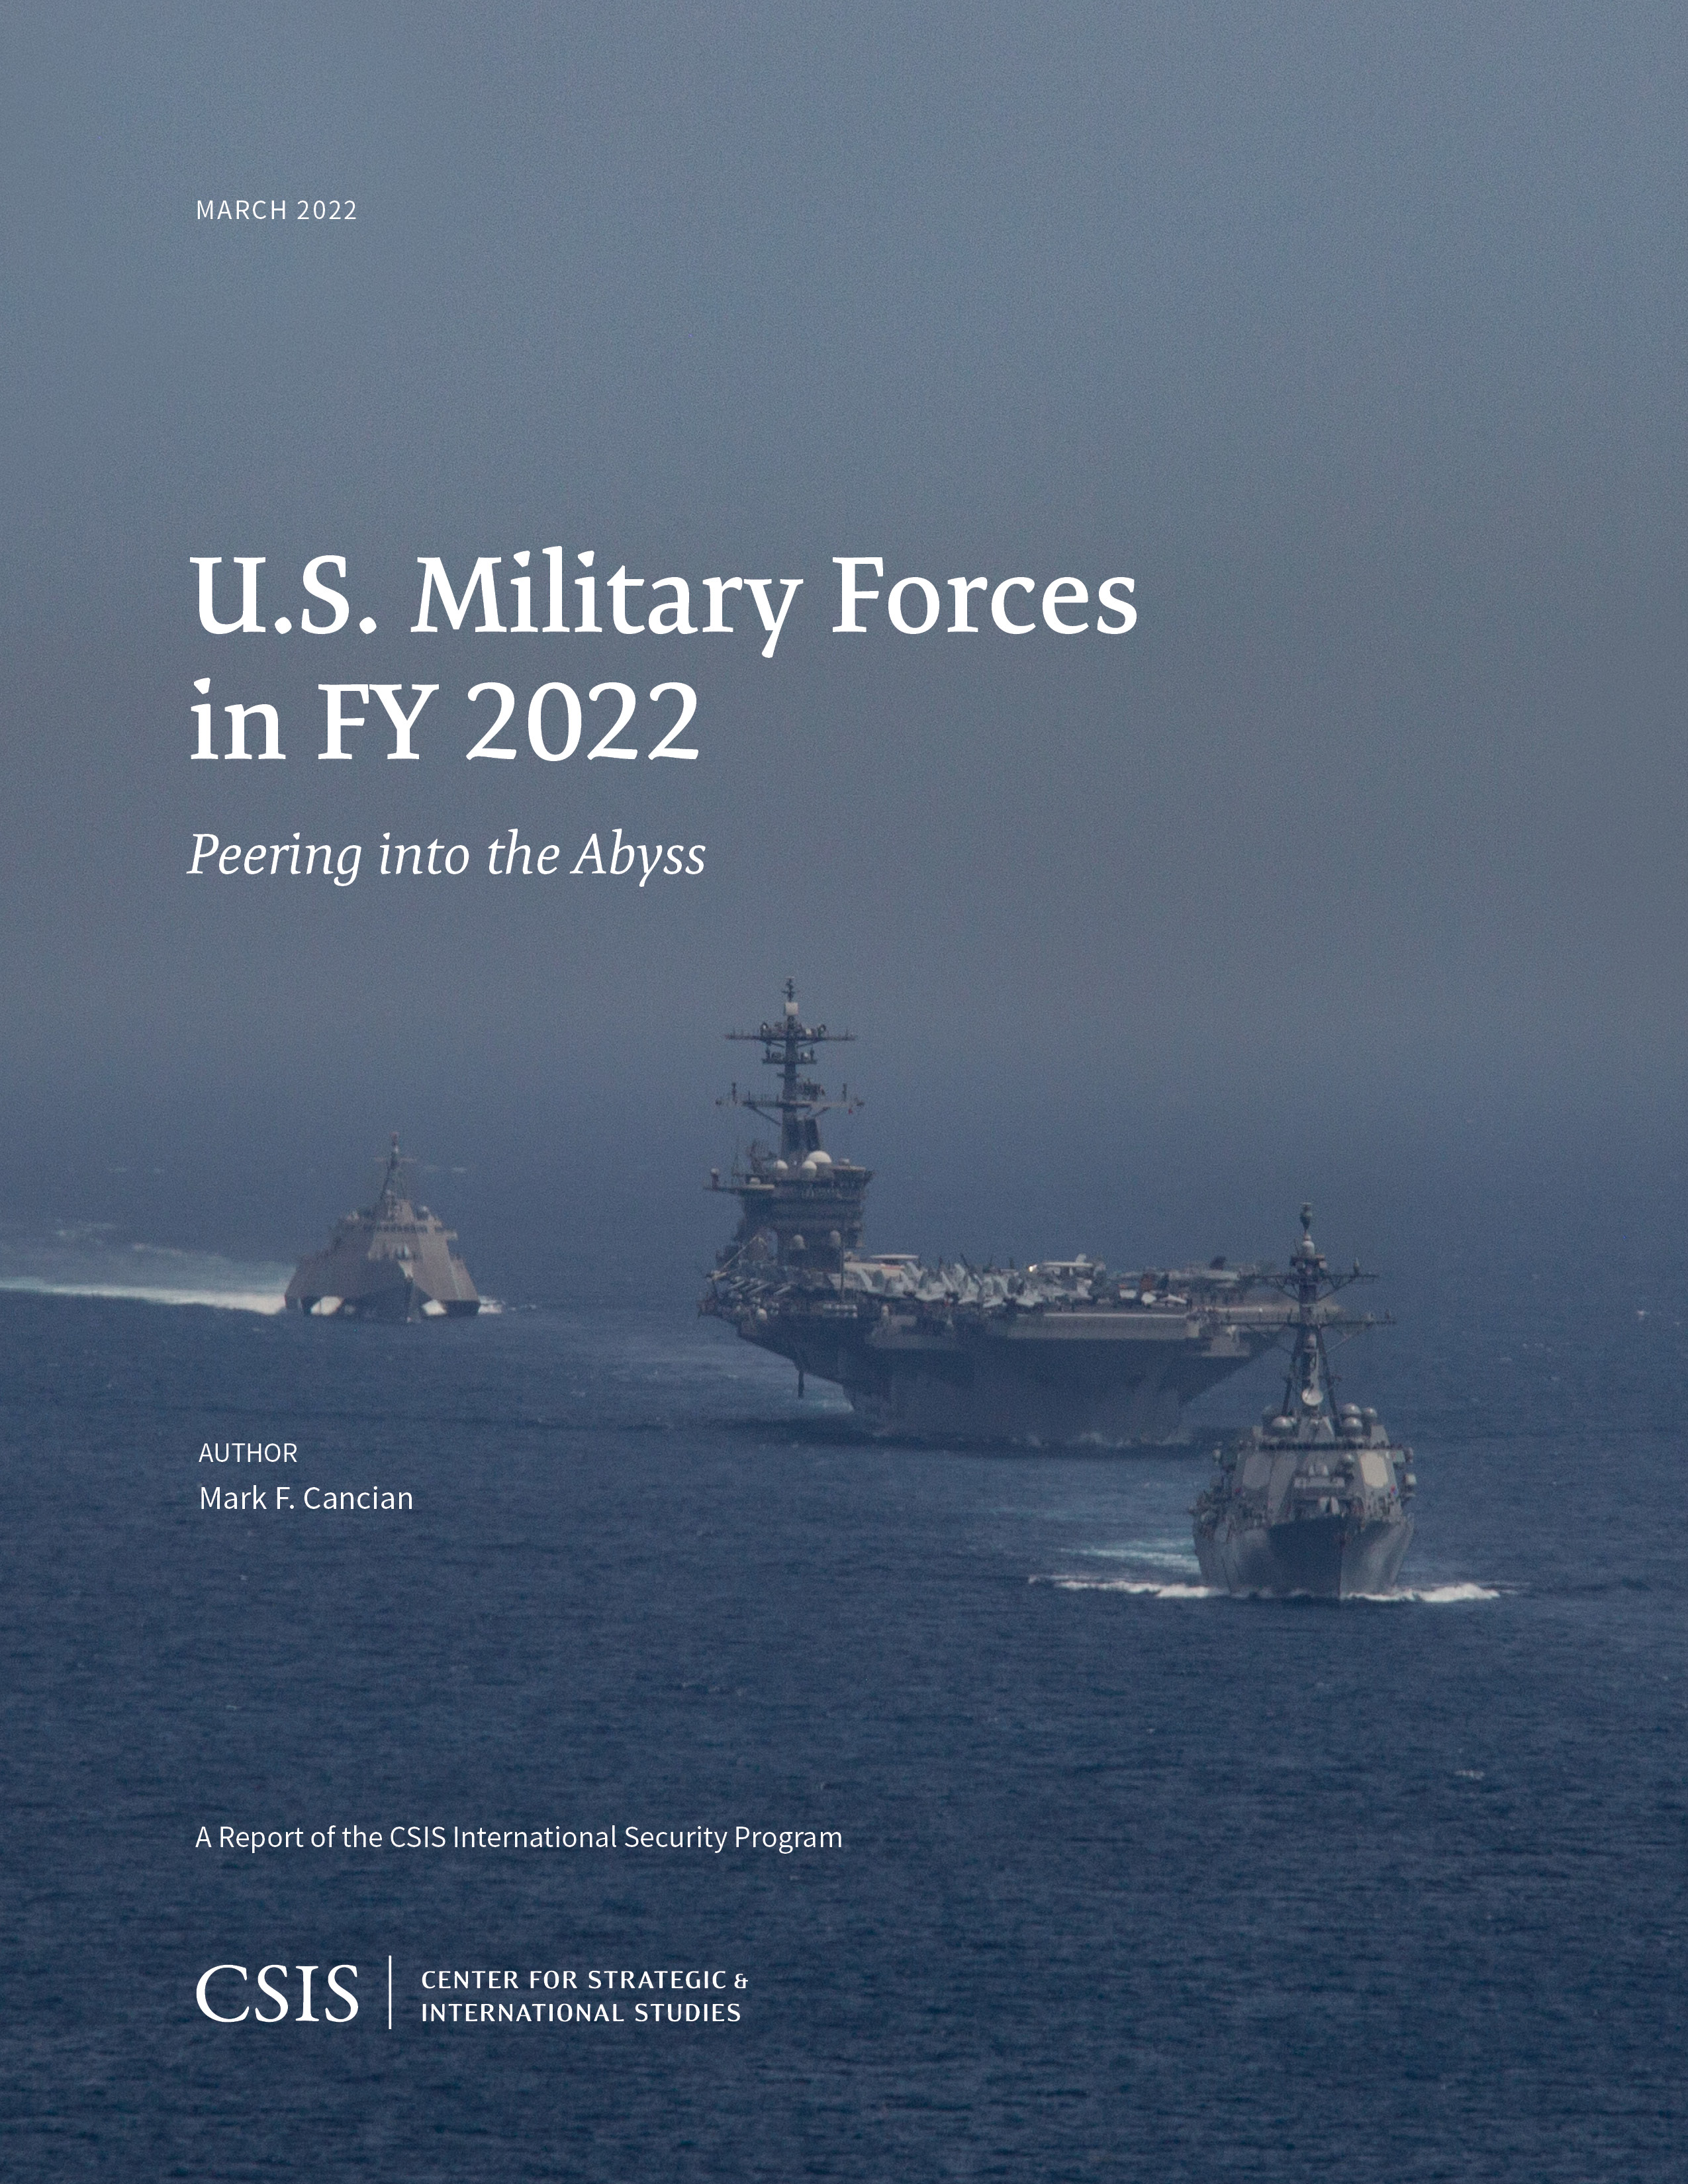 U.S. Military Forces in FY 2022: Peering into the Abyss